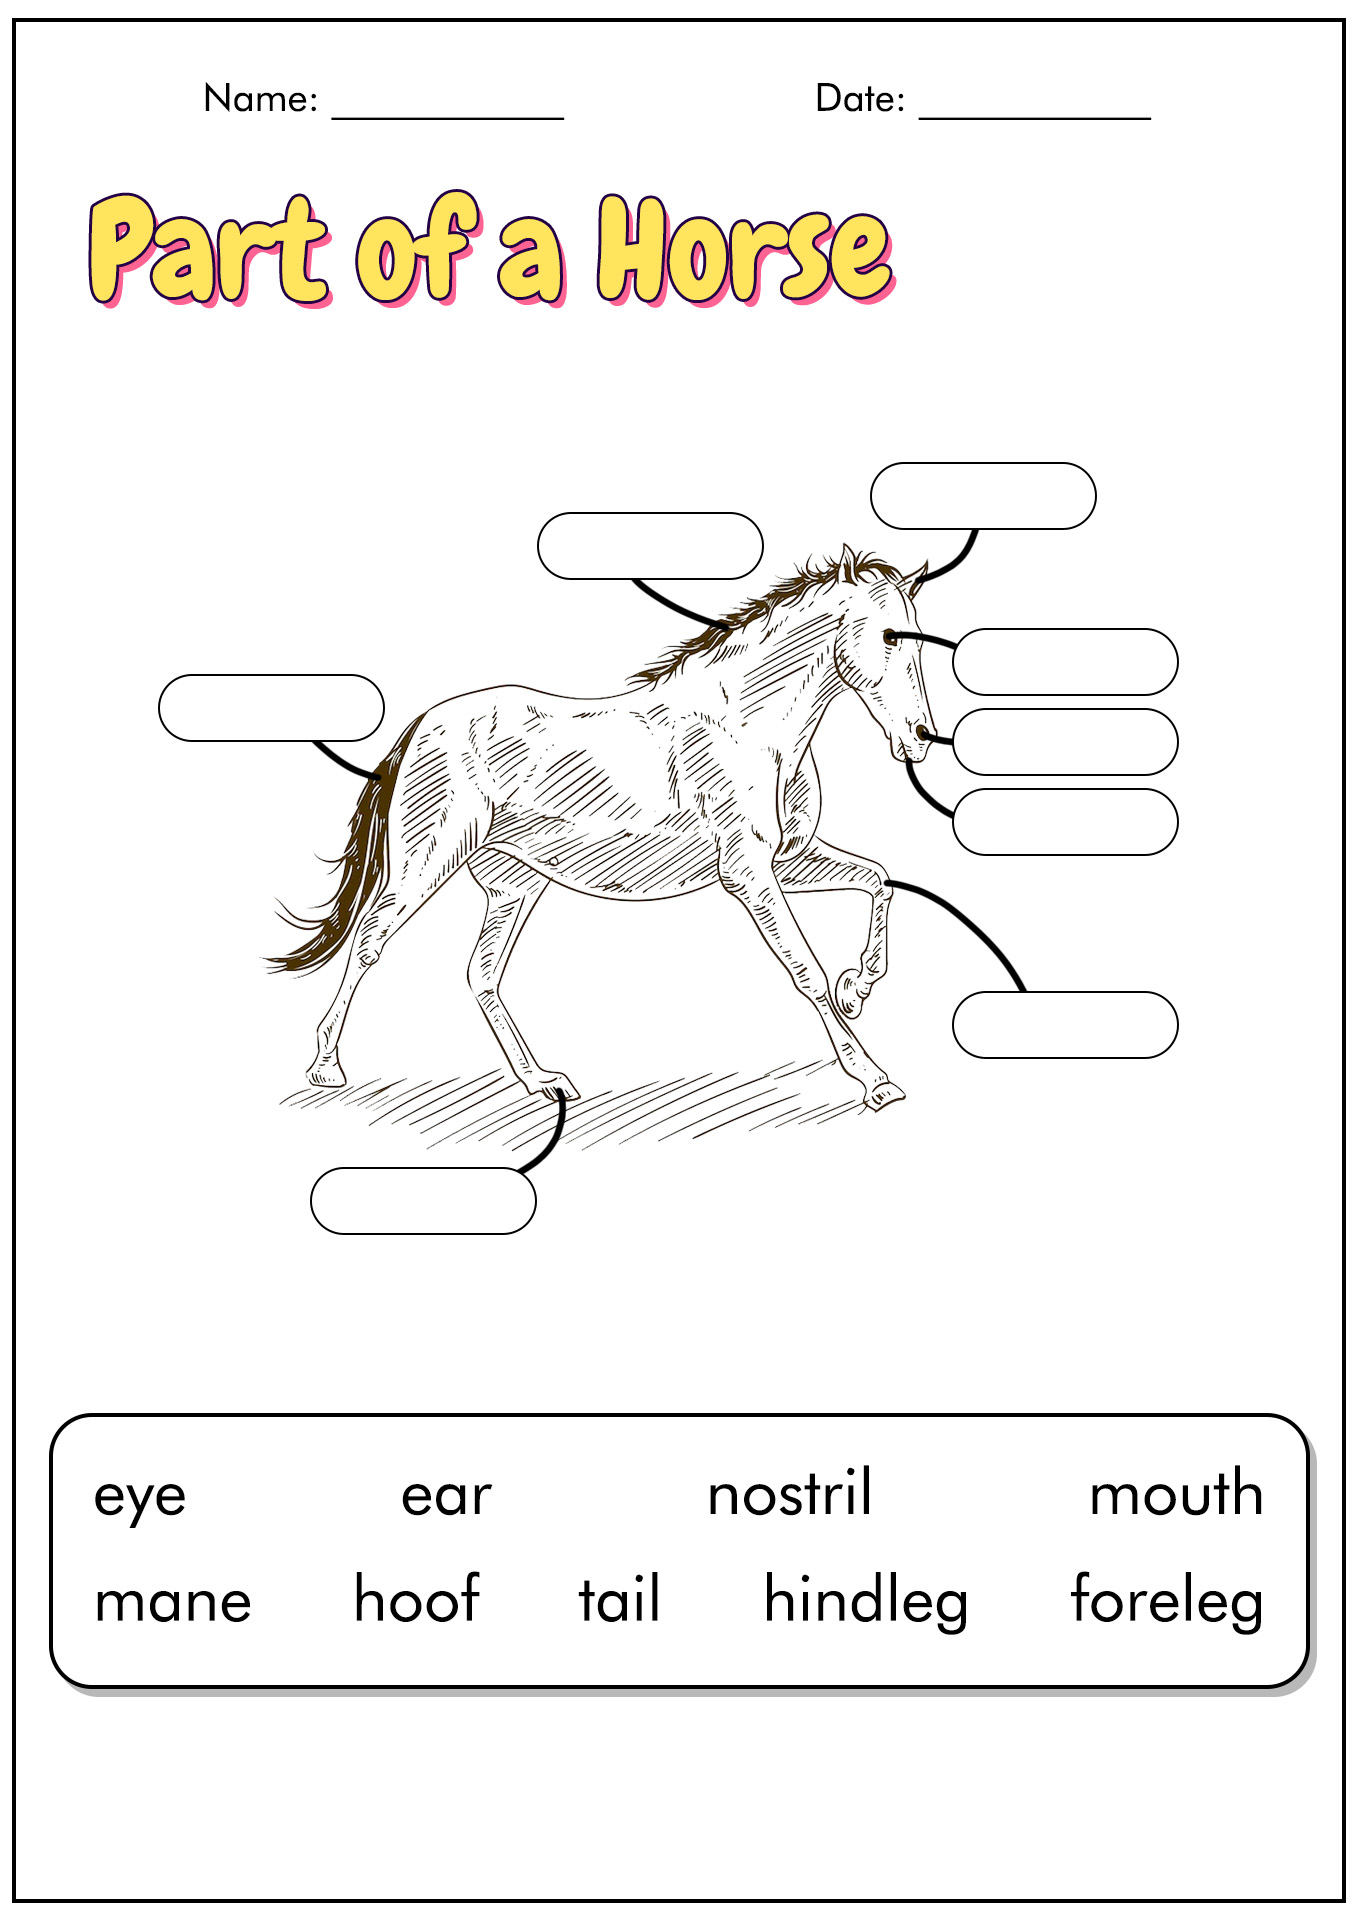 18 Best Images of Horse Study Worksheets - Horse Riding Posture ...